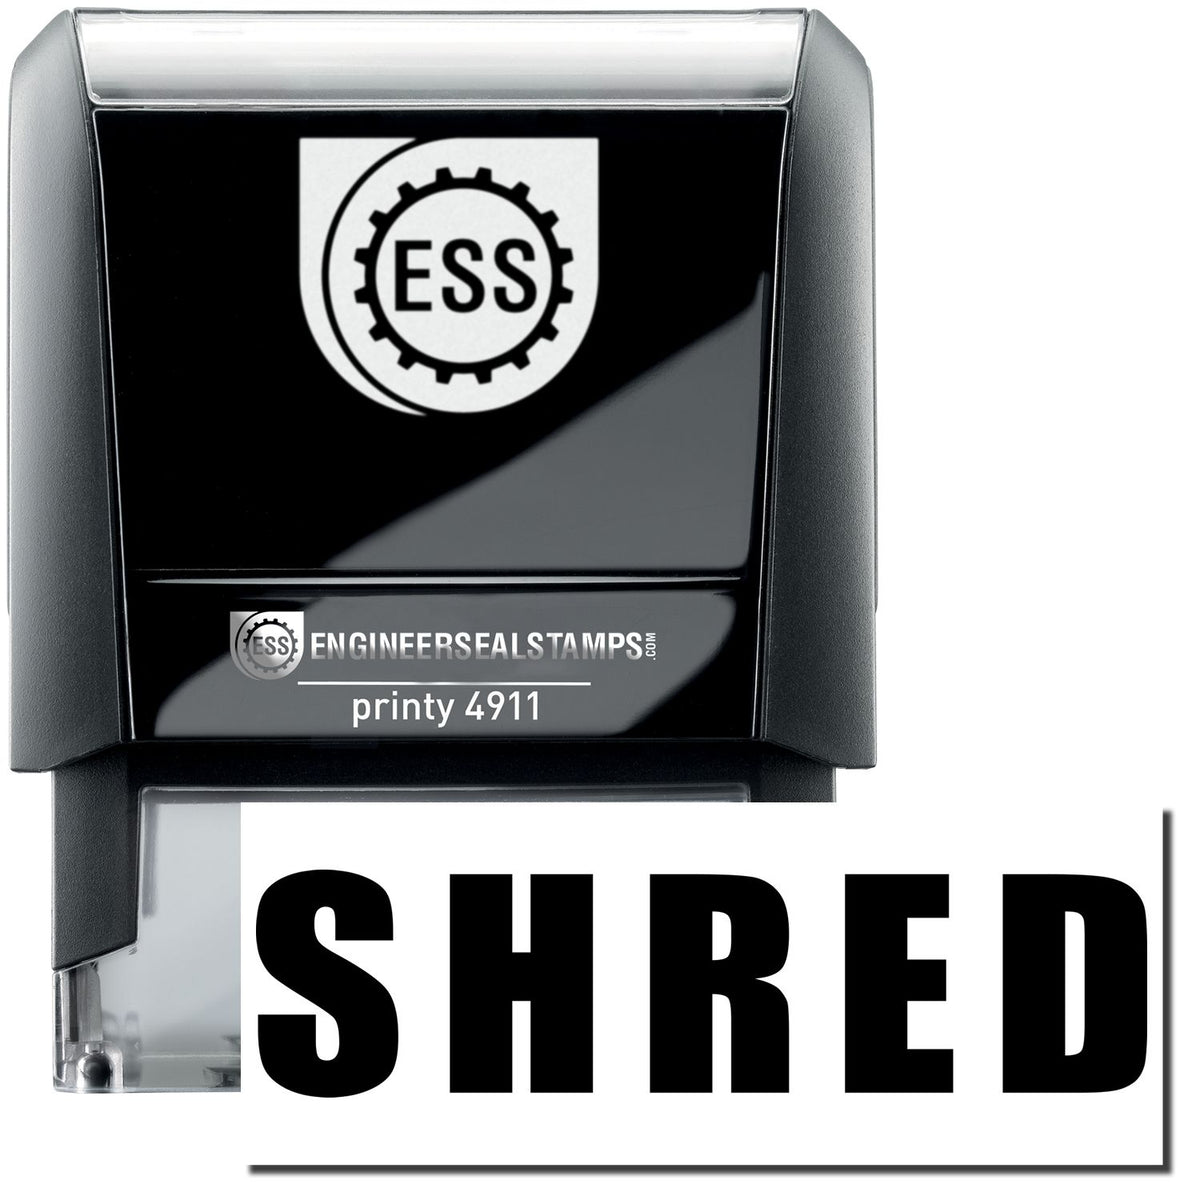 A self-inking stamp with a stamped image showing how the text &quot;SHRED&quot; in bold font is displayed after stamping.